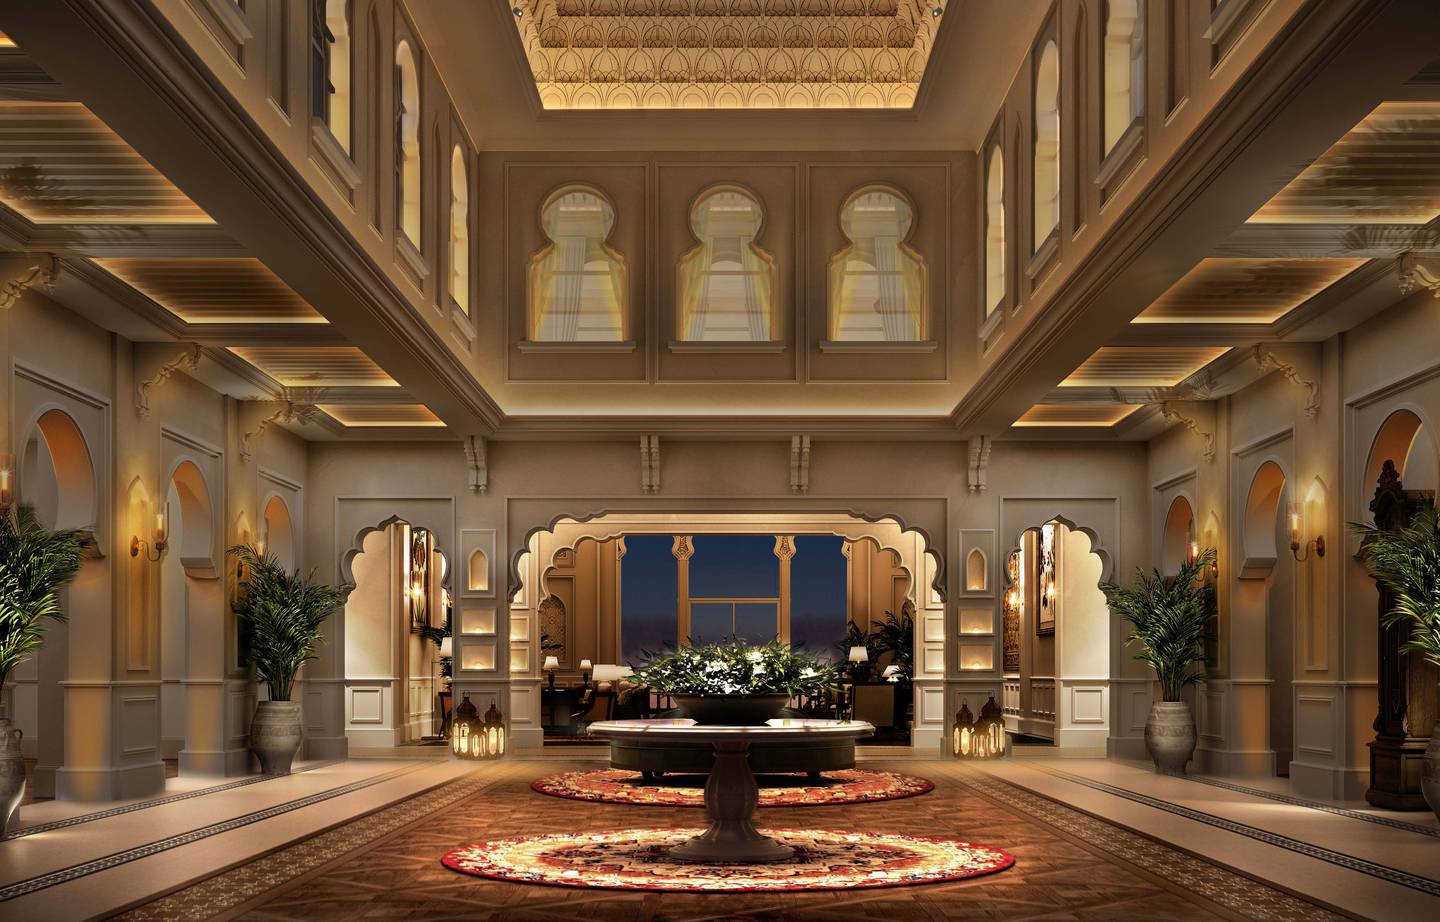 The Chedi Katara in Doha is inspired by Mughal architecture and the grand historic palaces in India. Photo: GHM Hotels